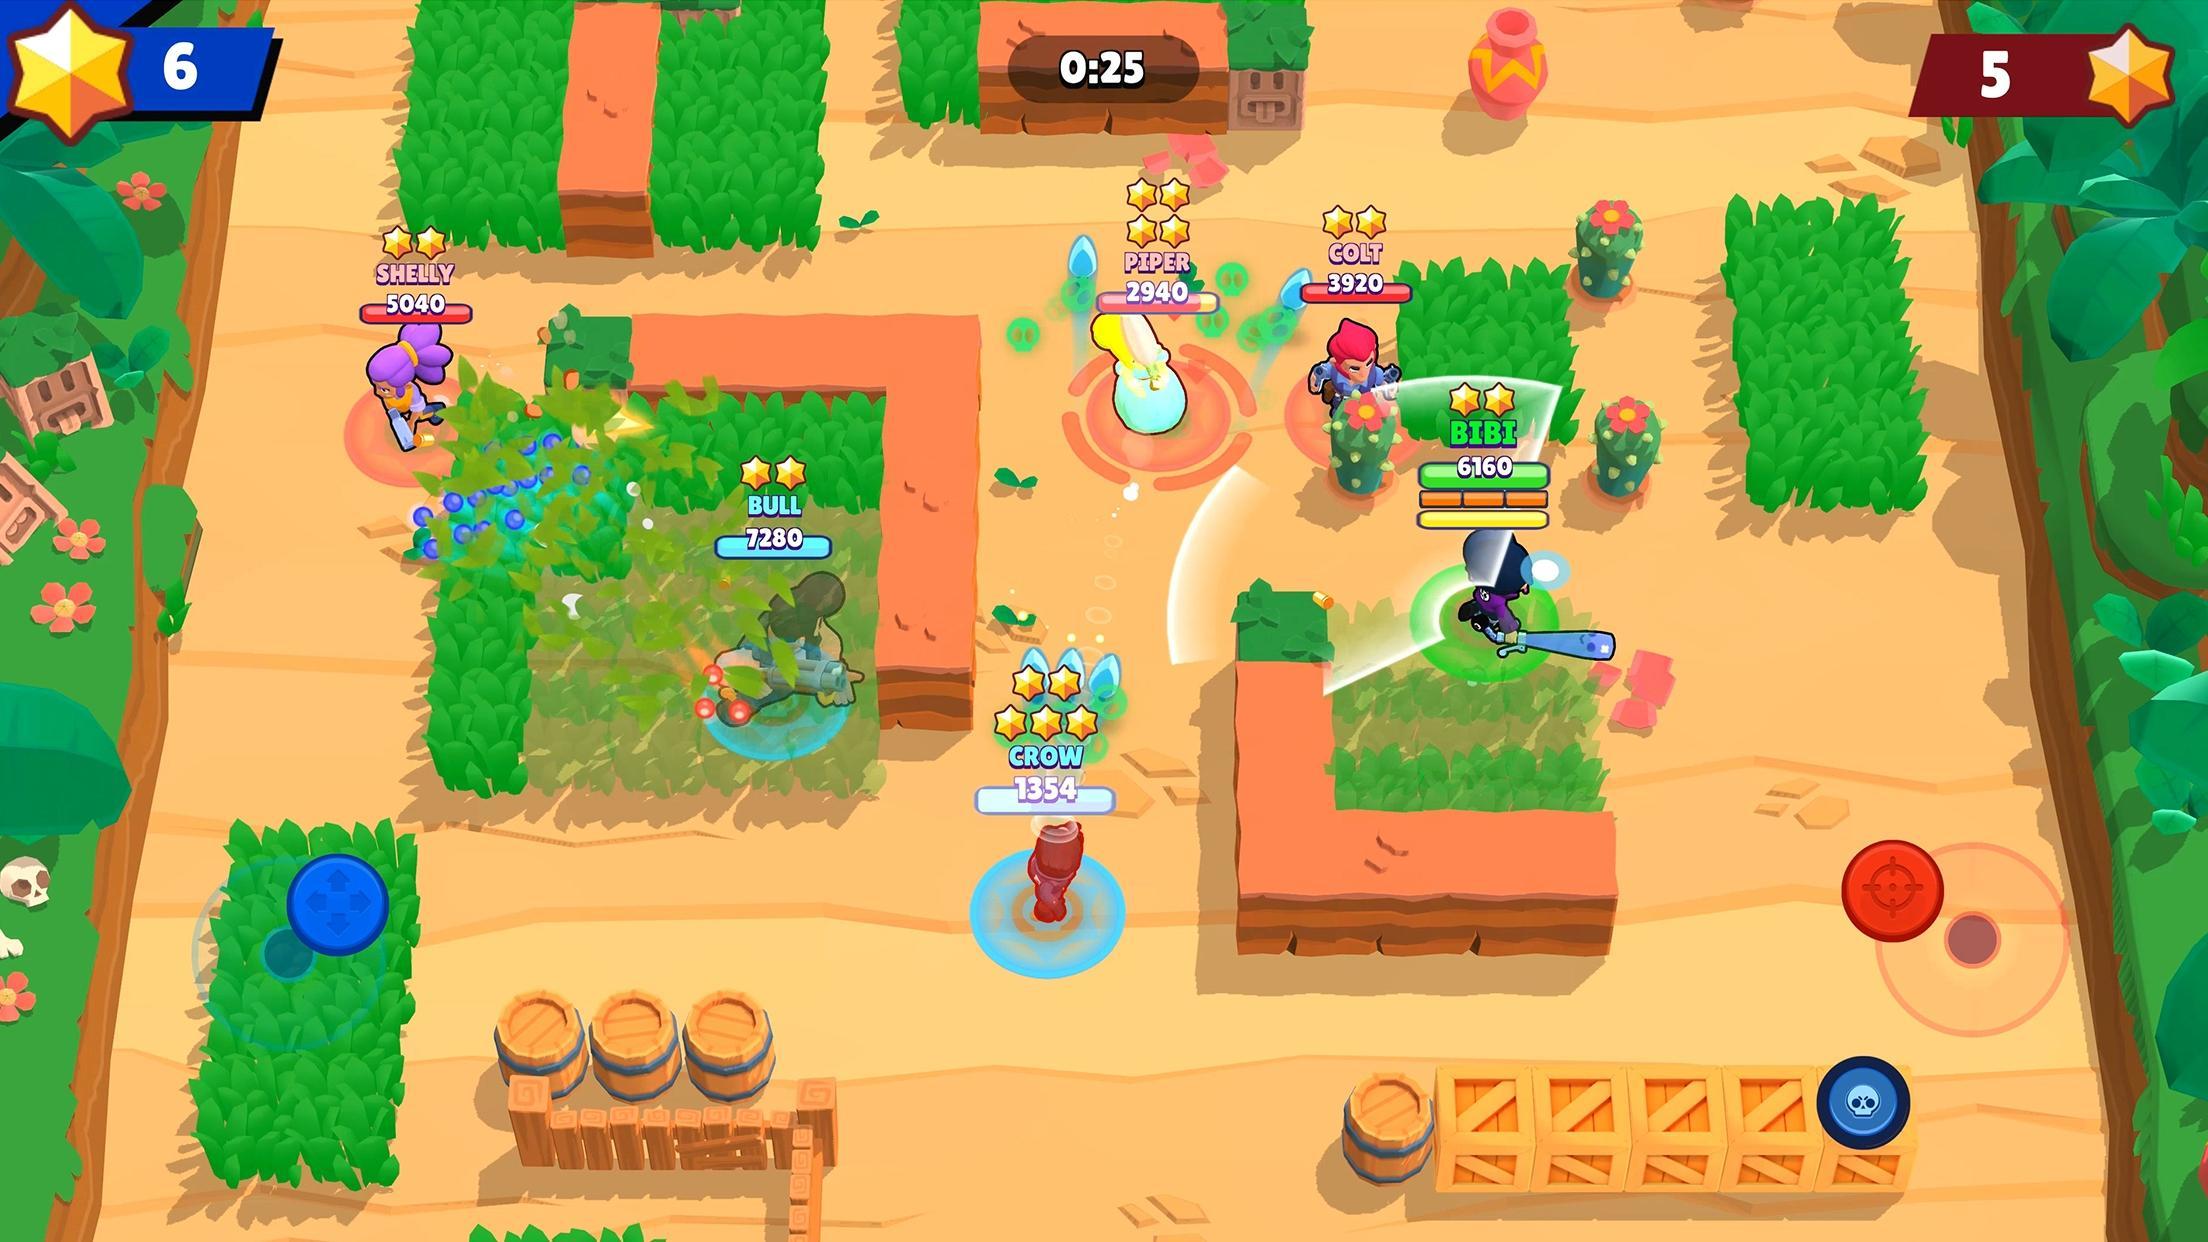 Brawl Stars Apk Download Pick Up Your Hero Characters In 3v3 Smash And Grab Mode Brock Shelly Jessie And Barley - descargas de brawl stars hasta el momento